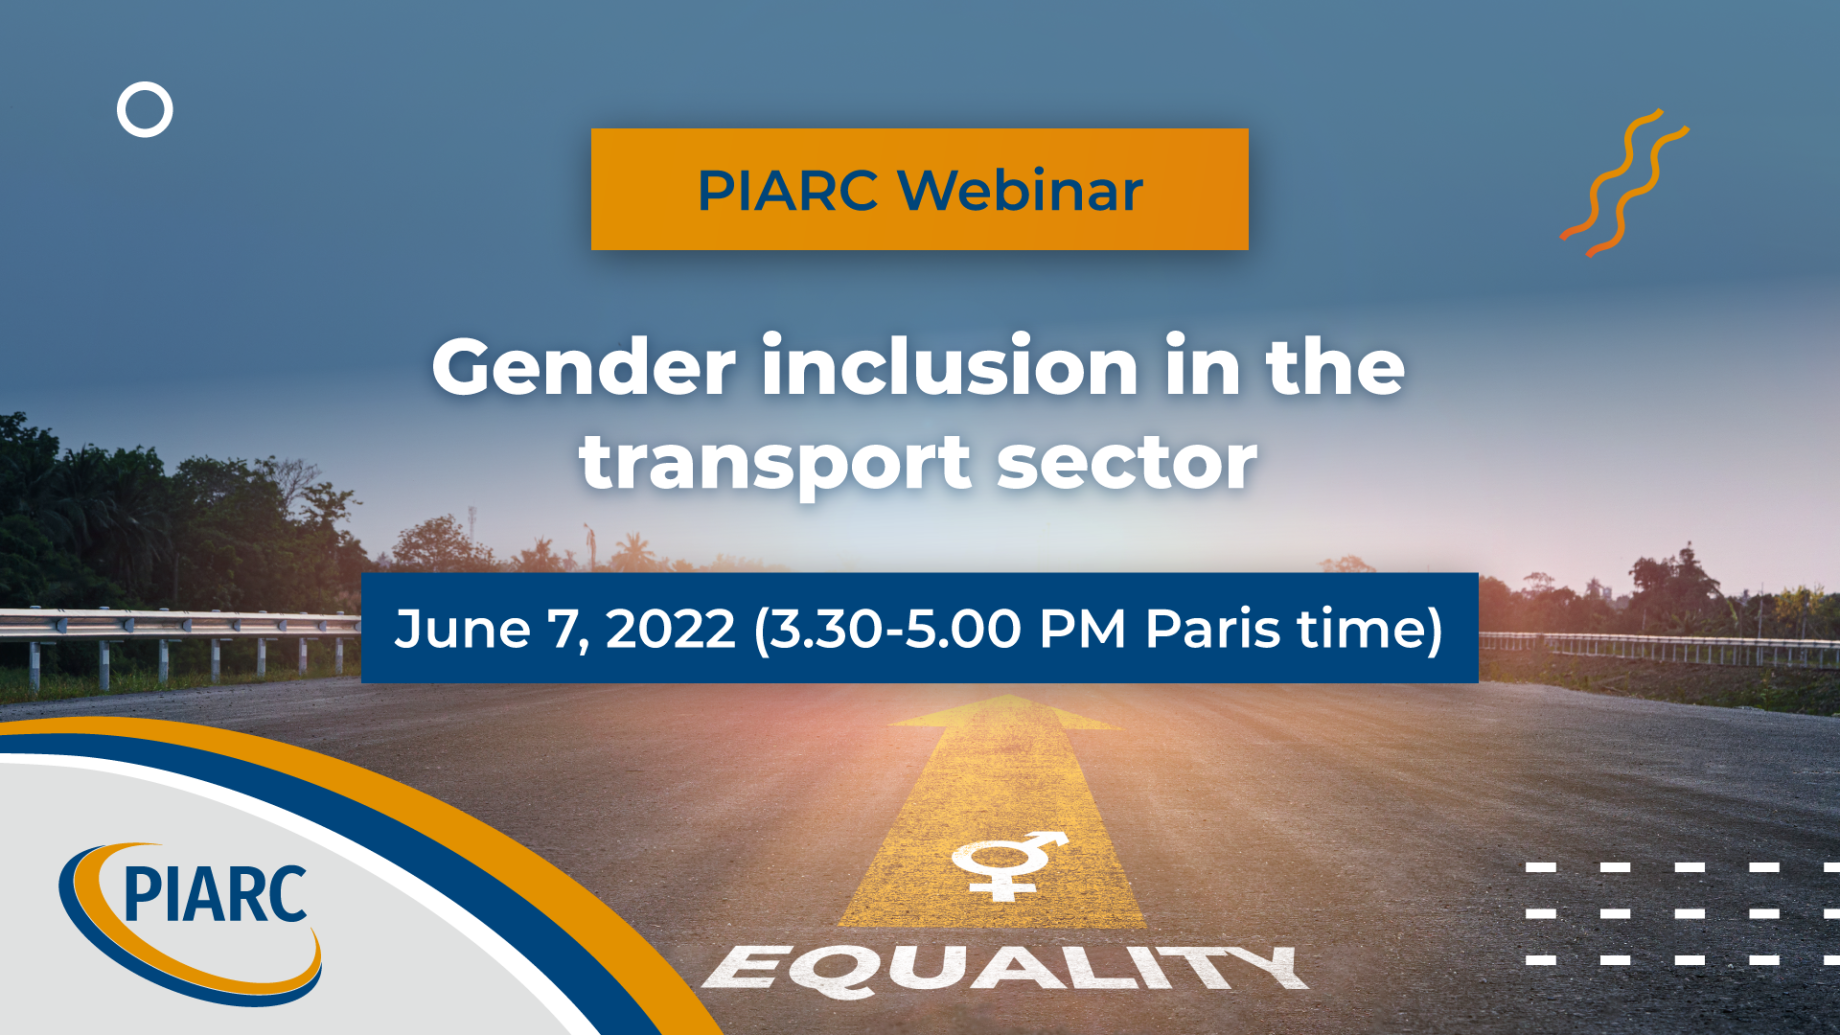 Join the webinar on "Gender inclusion in the transport sector"!